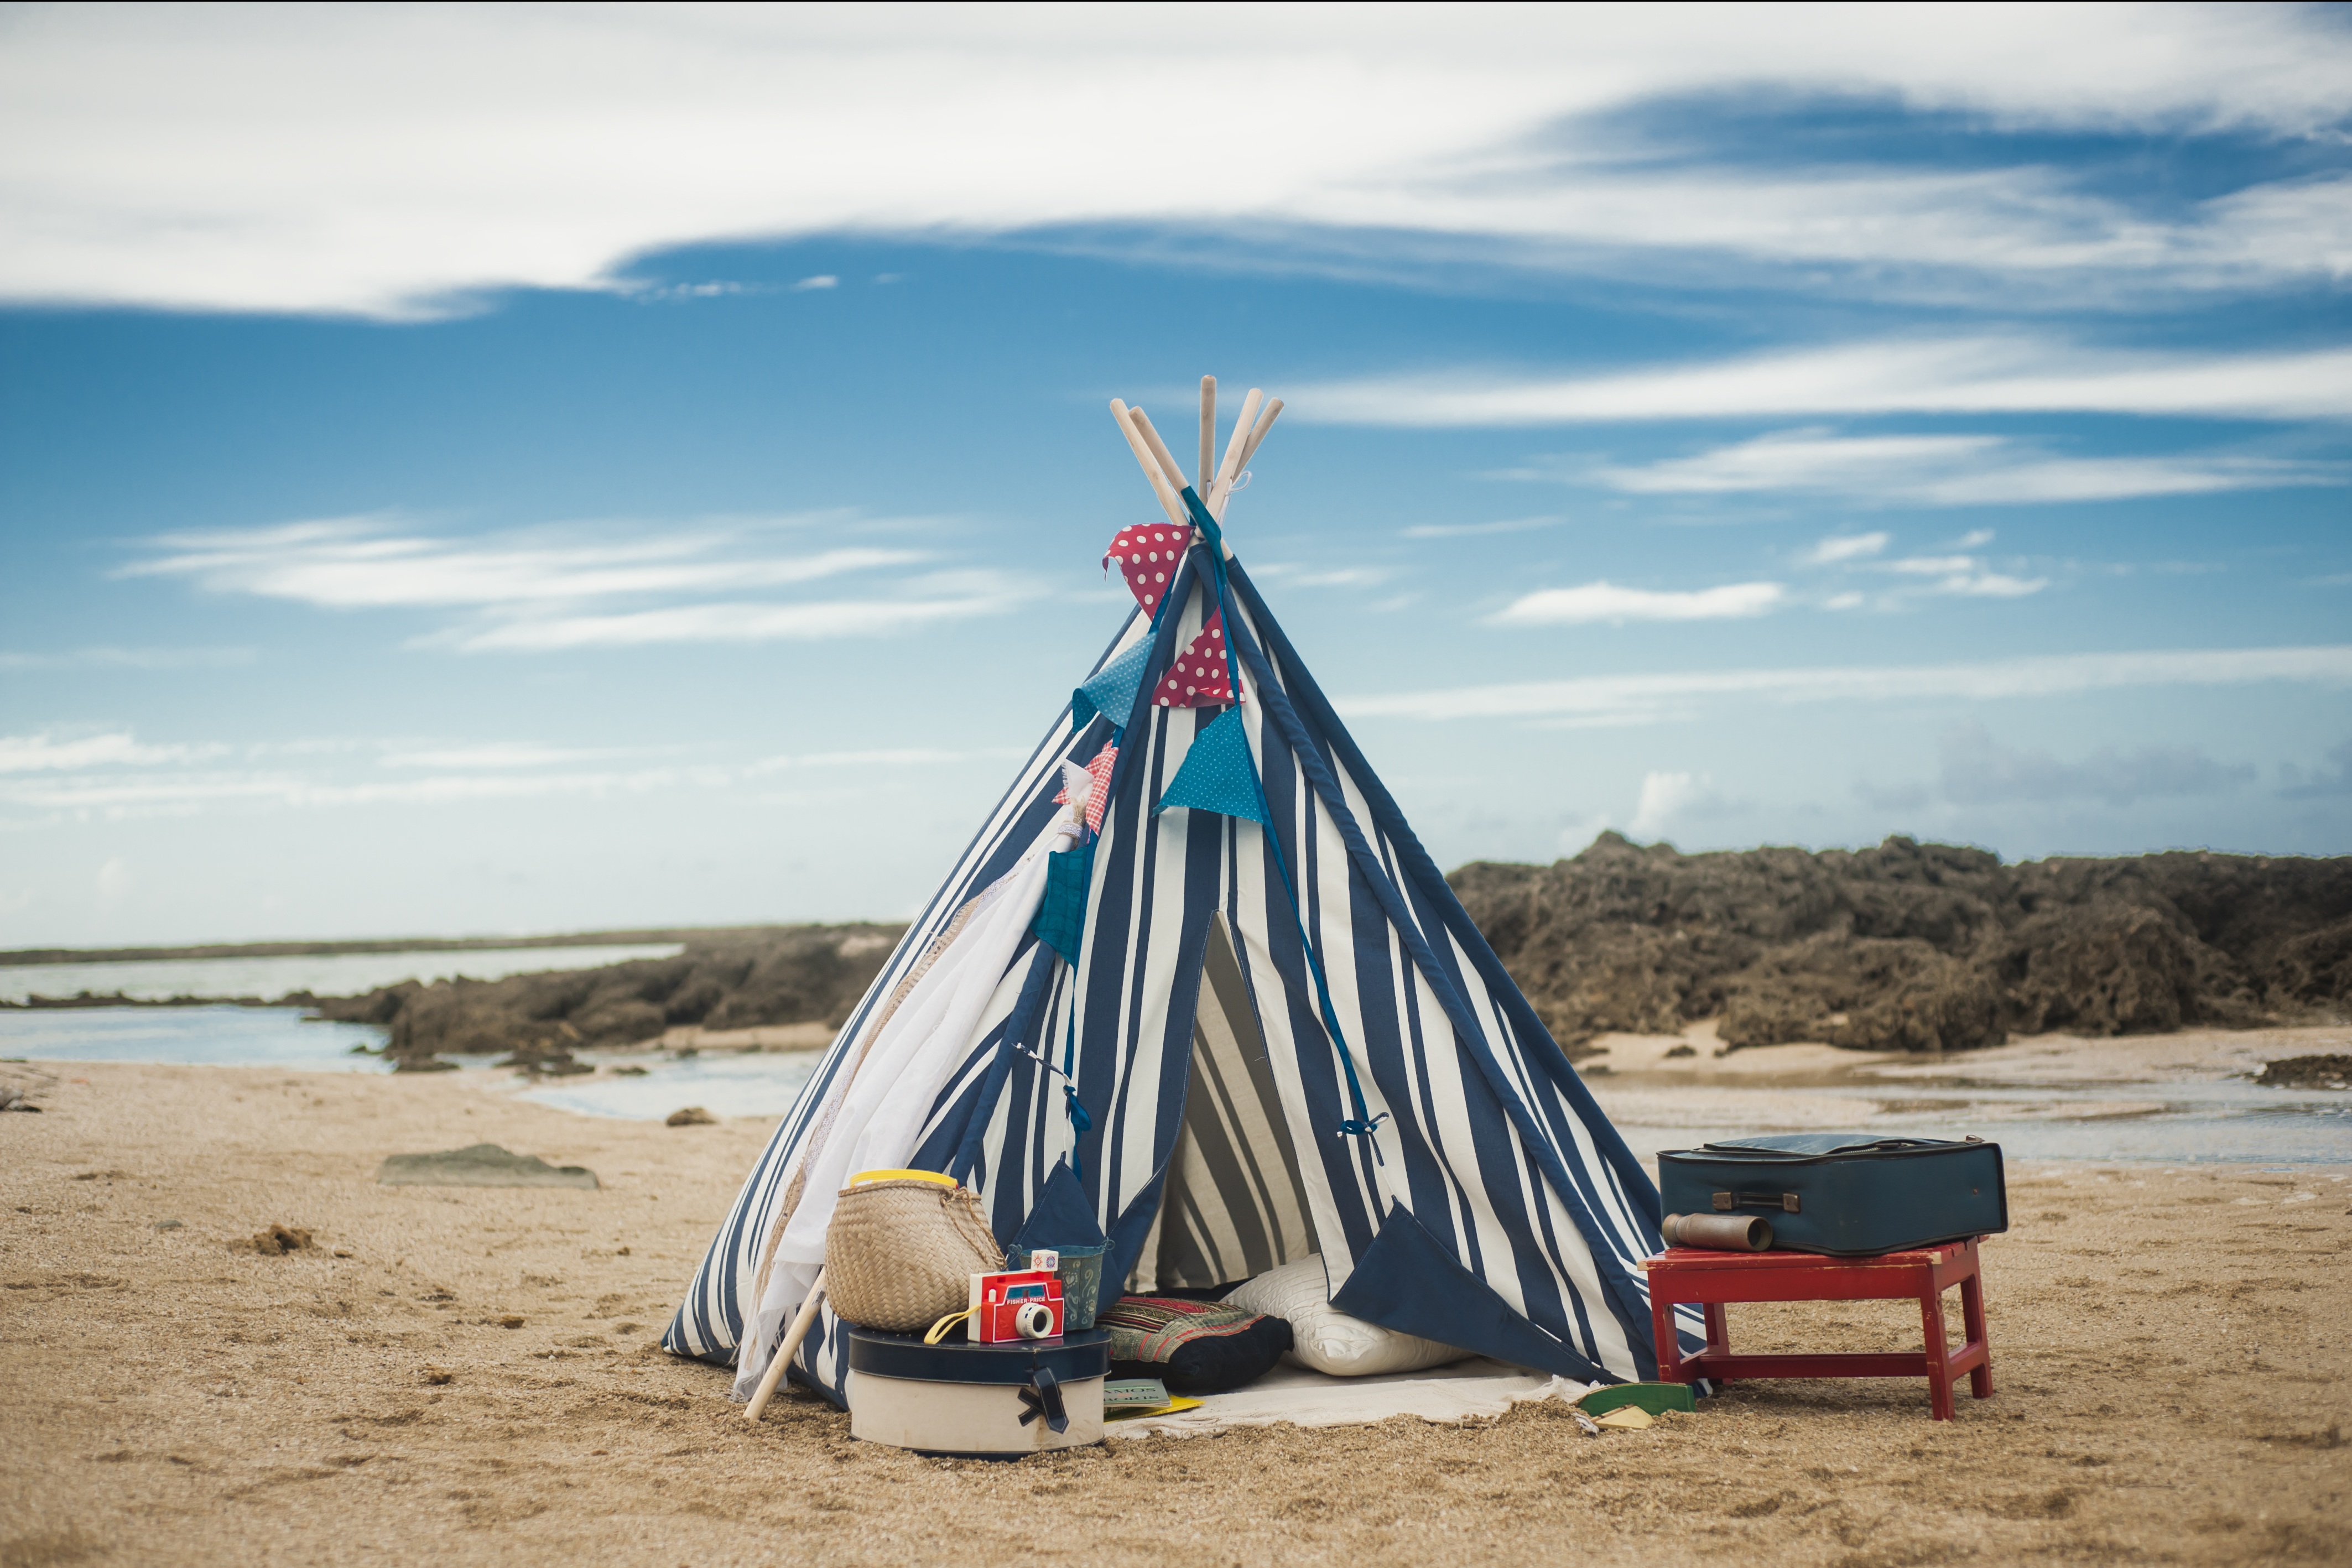 Teepee/tent at the beach